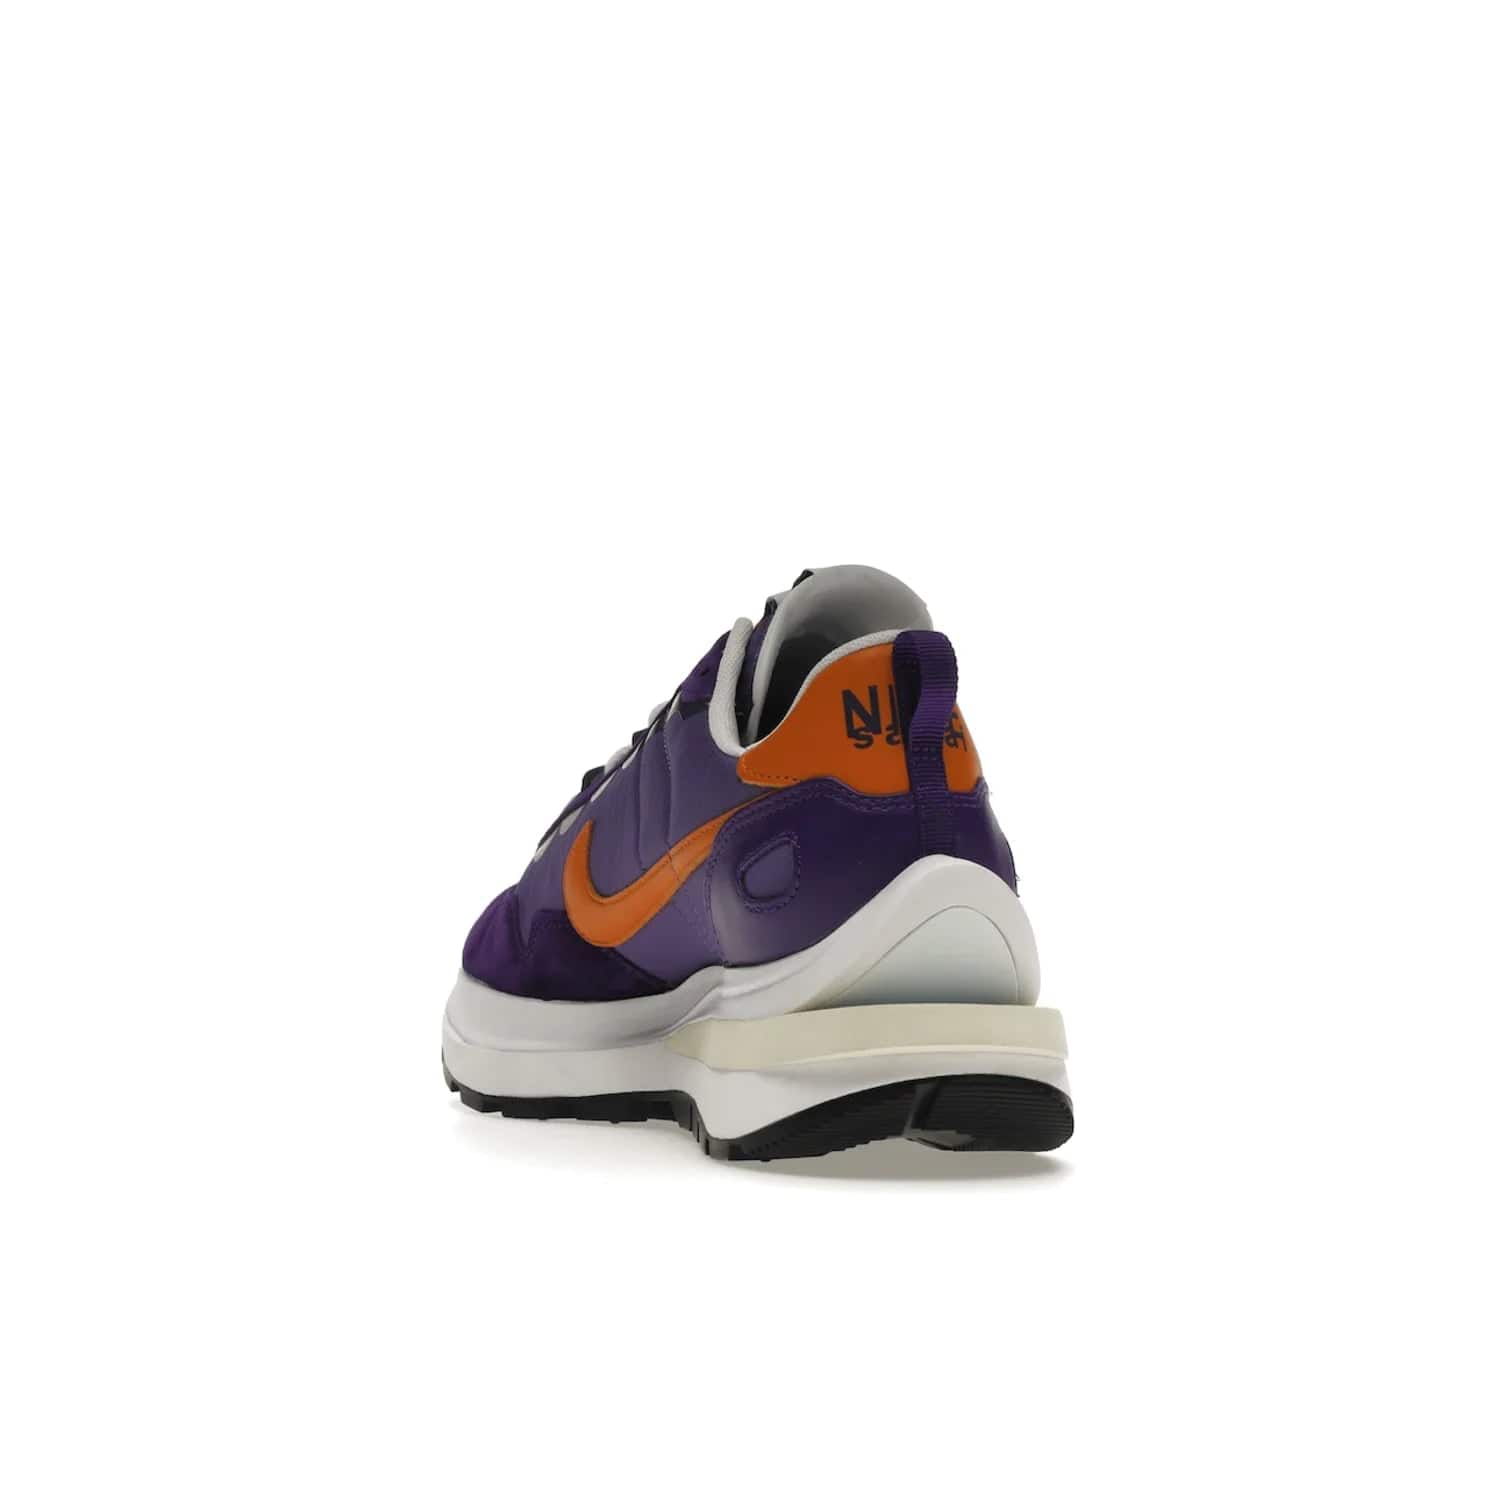 Nike Vaporwaffle sacai Dark Iris - Image 26 - Only at www.BallersClubKickz.com - Unique Nike Vaporwaffle sacai Dark Iris collab. Suede, leather & textile upper with Orange accents. Dual tongues & midsoles. Woven labels & heel tabs branding. Colorway of Purple, Orange, White & Black. Must-have for any wardrobe.